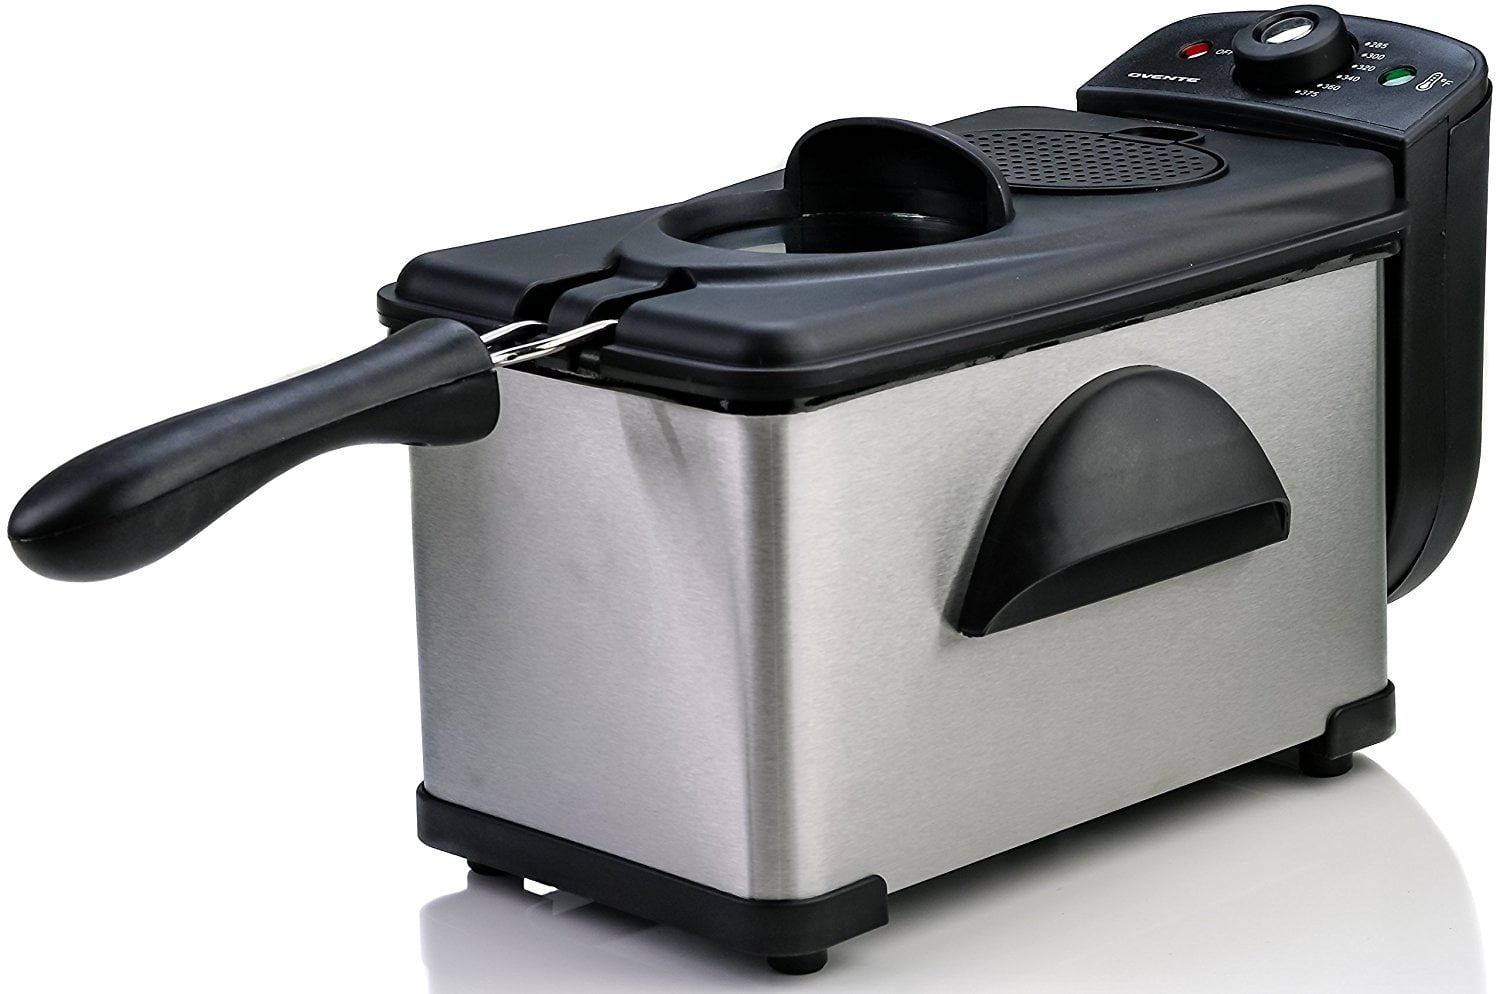 OVENTE Electric Deep Fryer 2 Liter Capacity, Viewing Window and Odor  Filter, New Silver FDM2201BR 